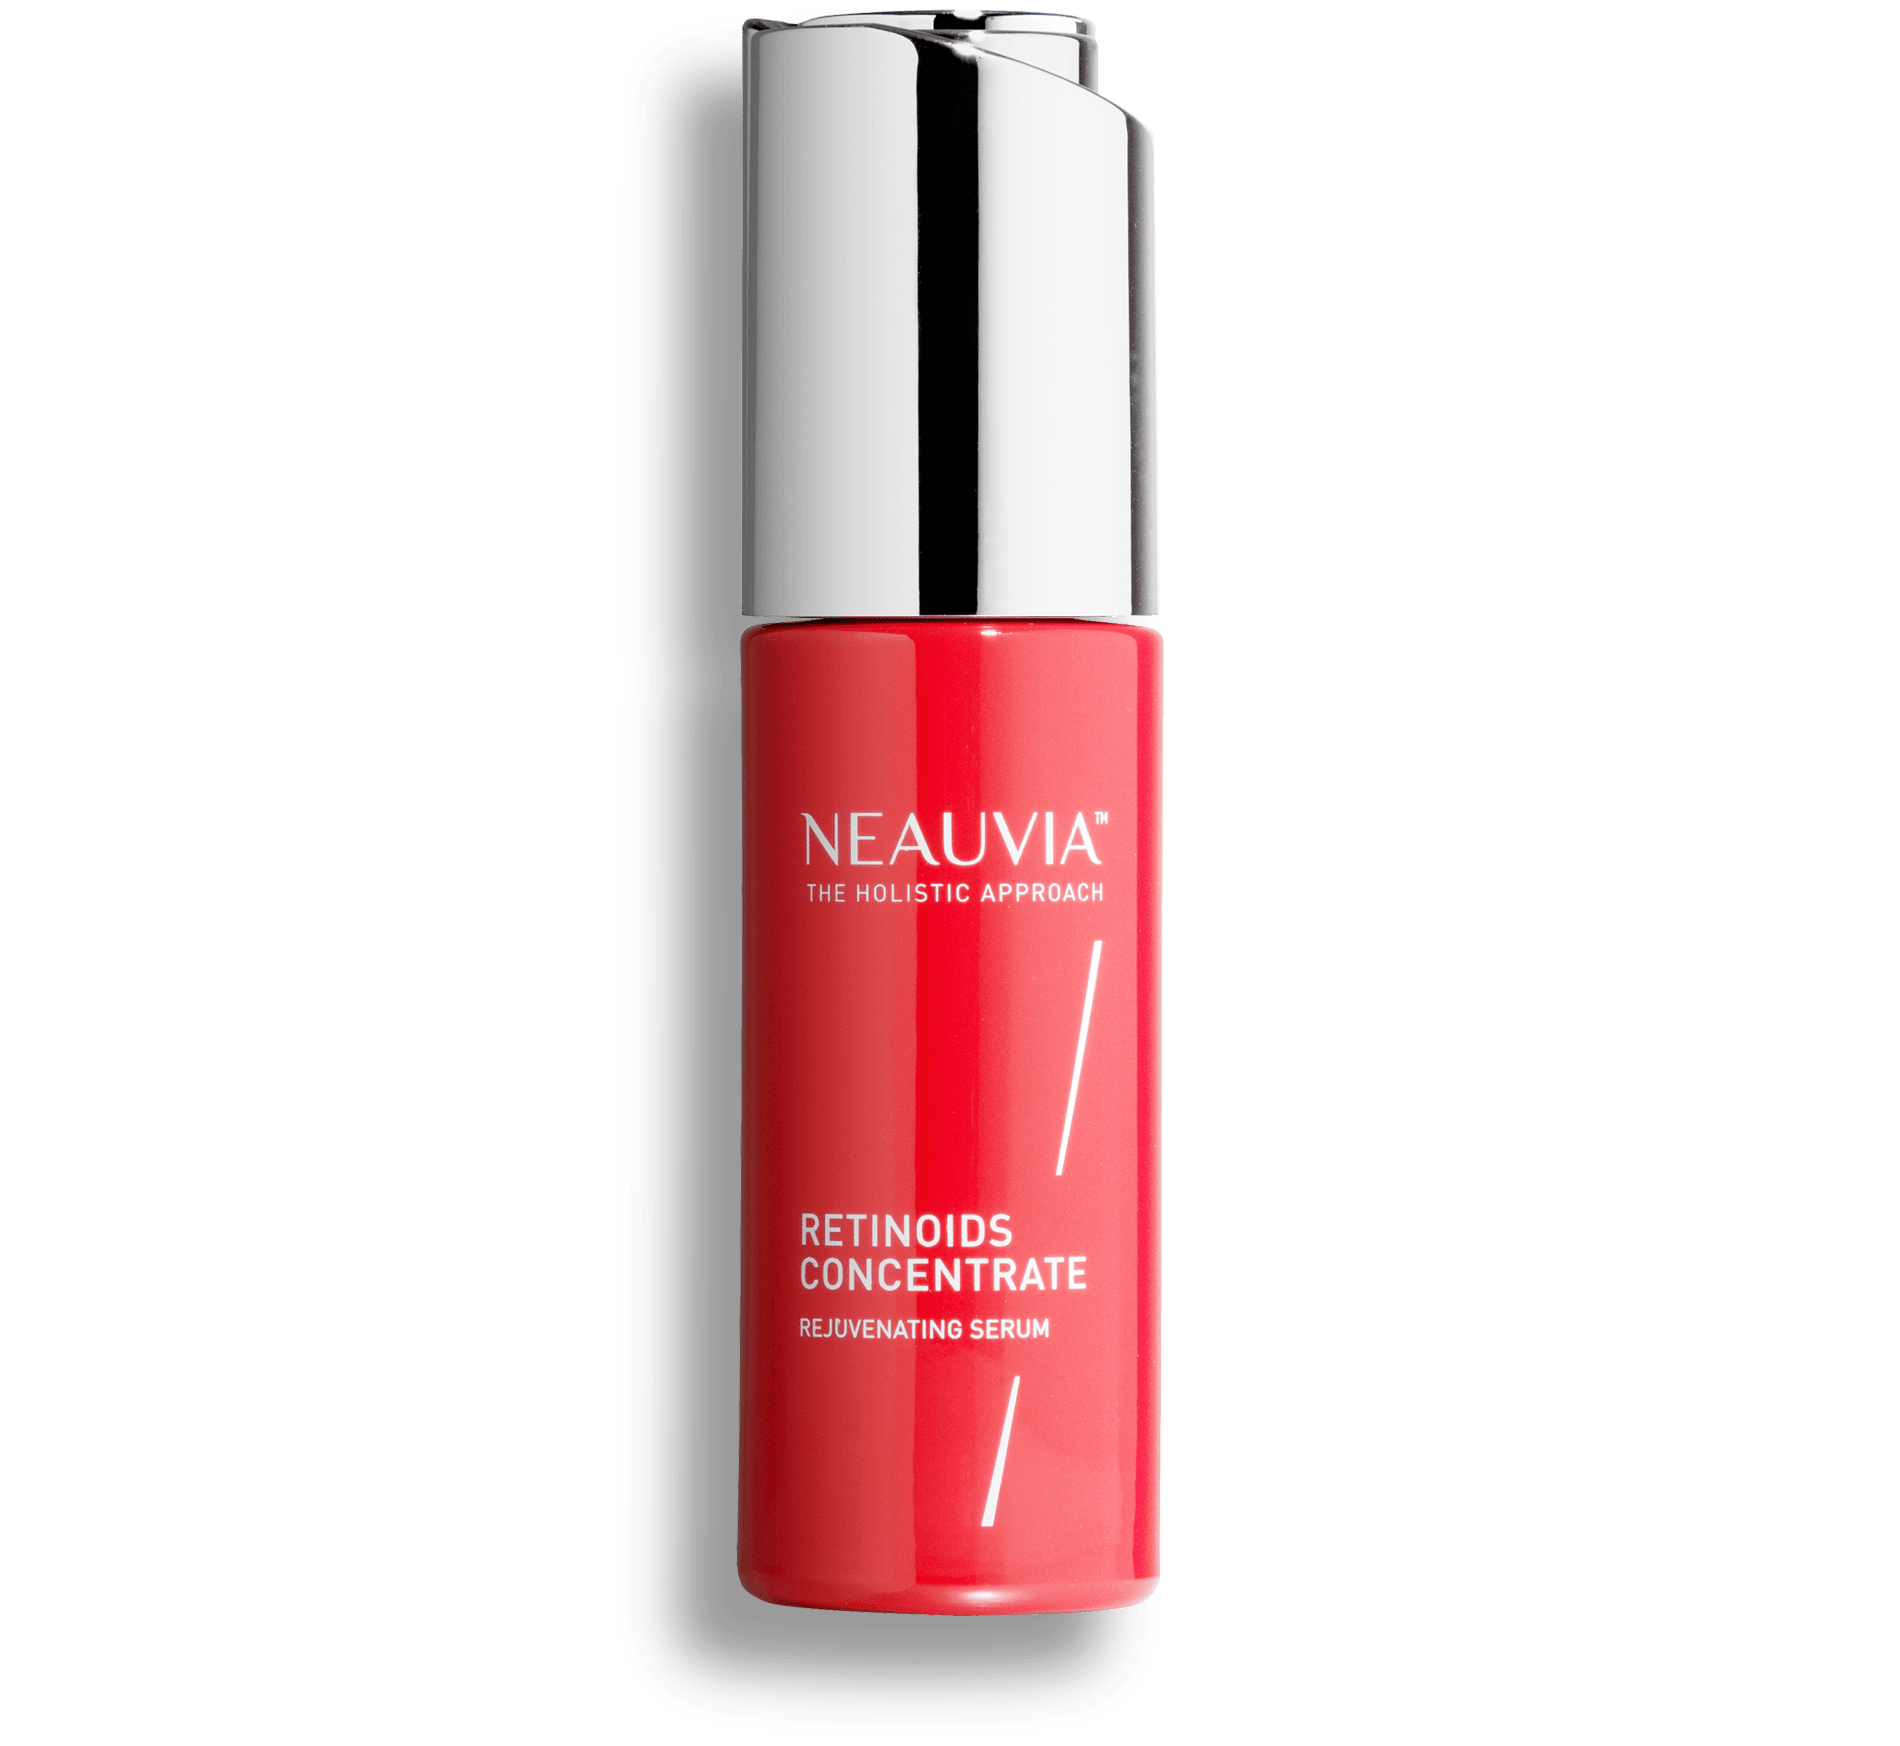 RETINOIDS CONCENTRATE